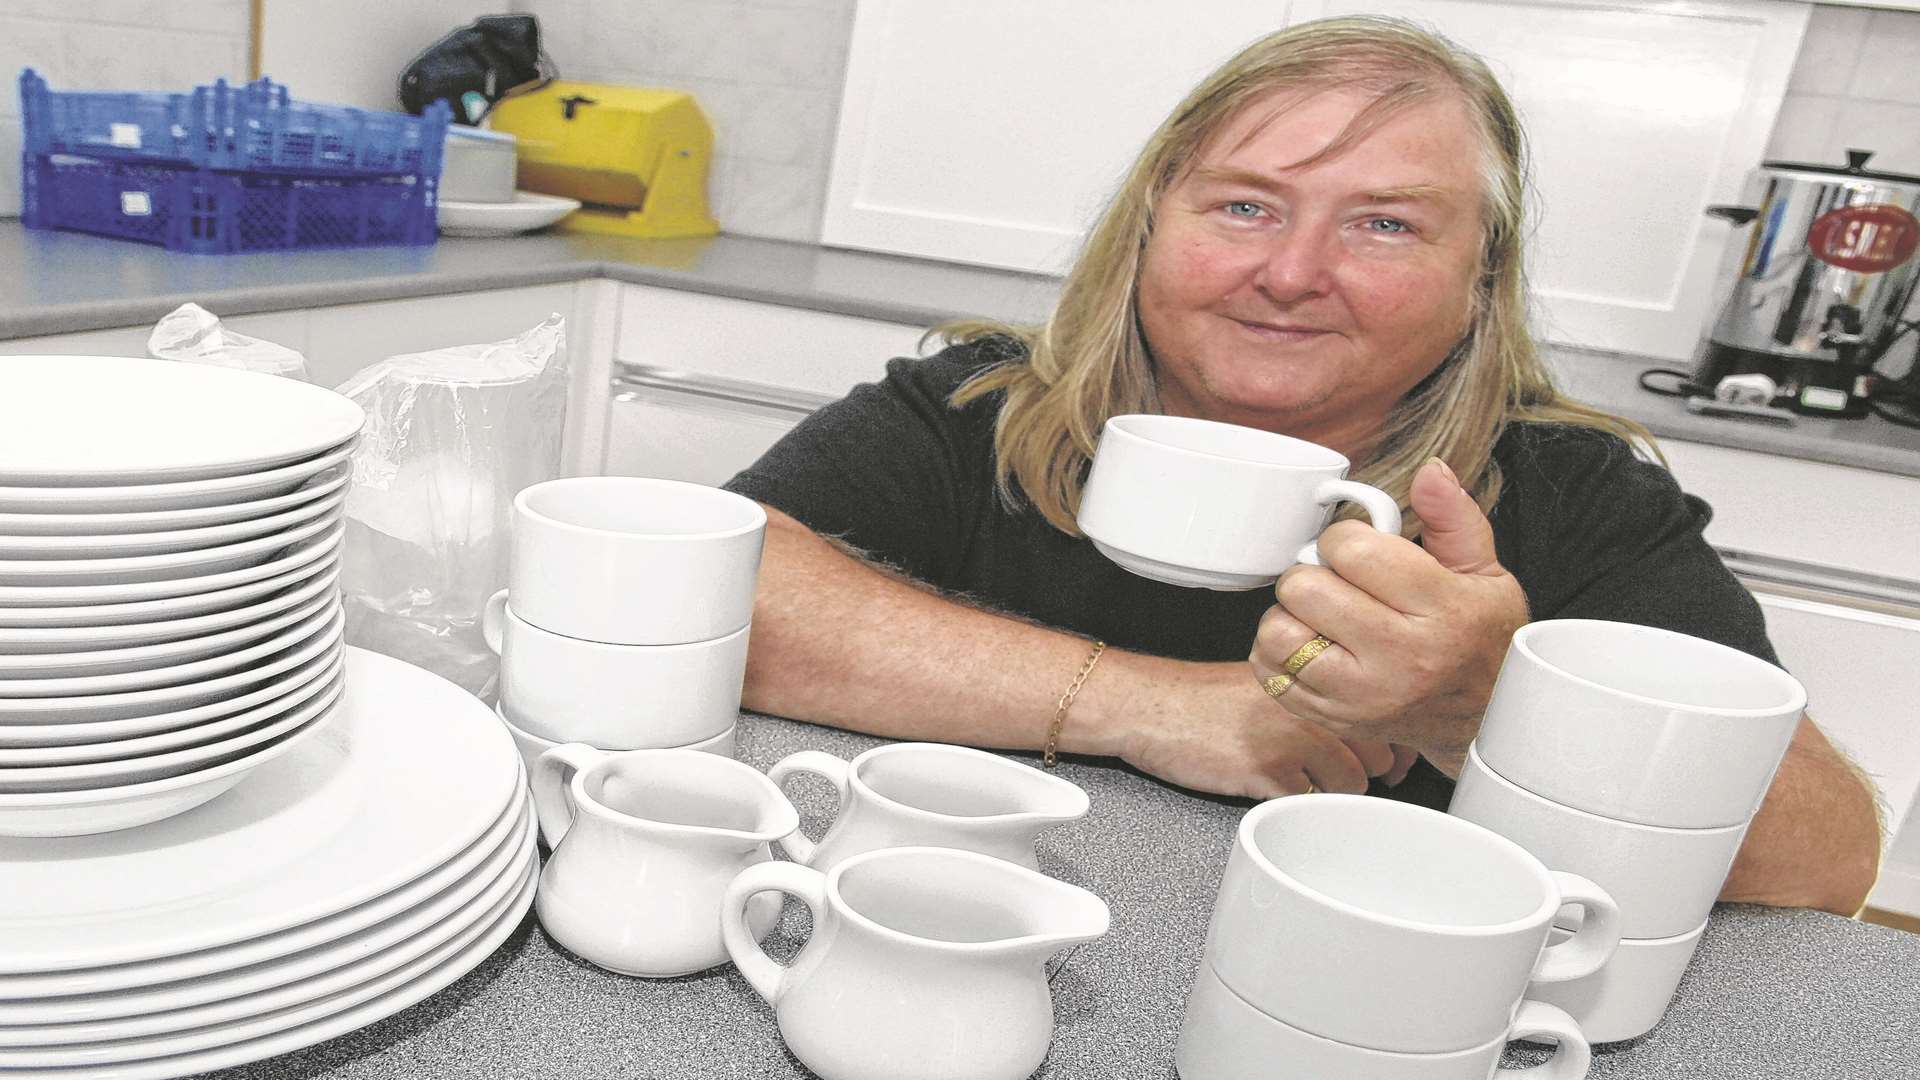 Theresa Langworthy splashed out on crockery when as chairman of the Friendship House, Hall Committee she received £4,000 from Minster Parish Council.